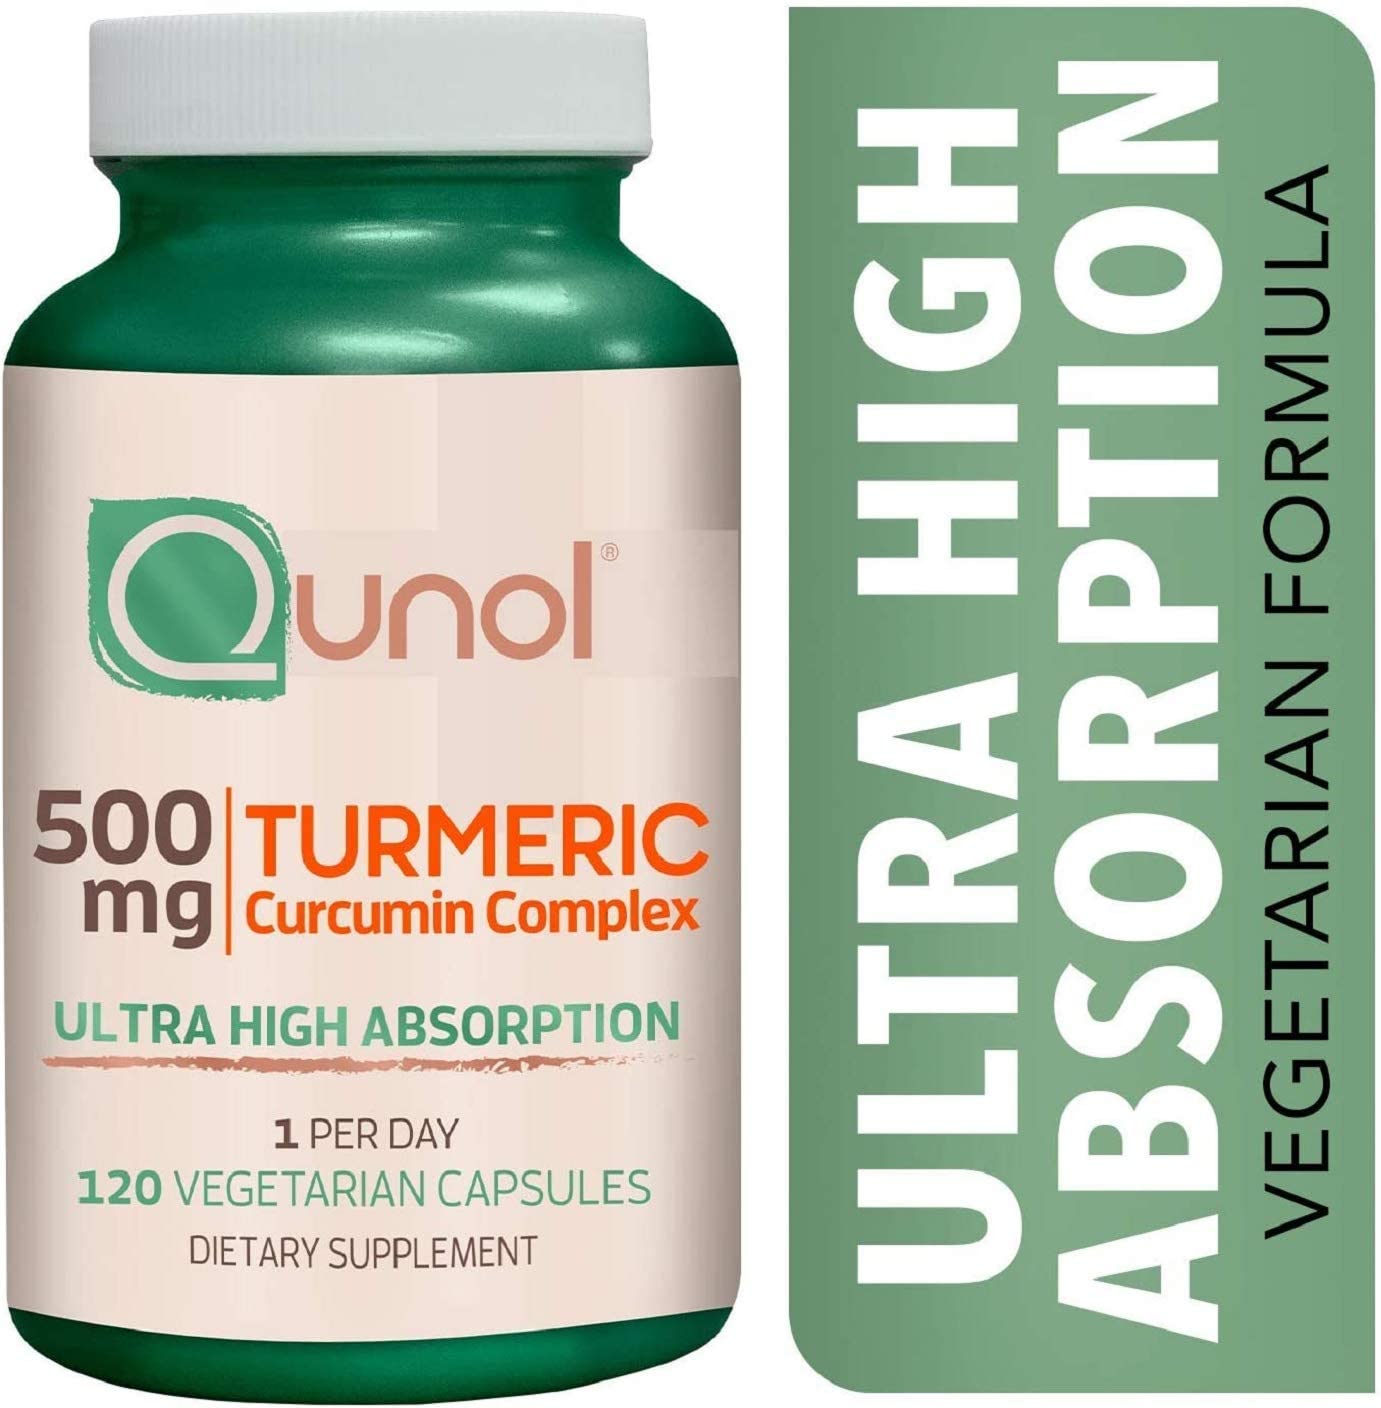 Turmeric Curcumin 500mg Vegetarian Capsules, Qunol Ultra High Absorption, Supports Healthy Inflammation Response, Joint Support, Dietary Supplement, Extra